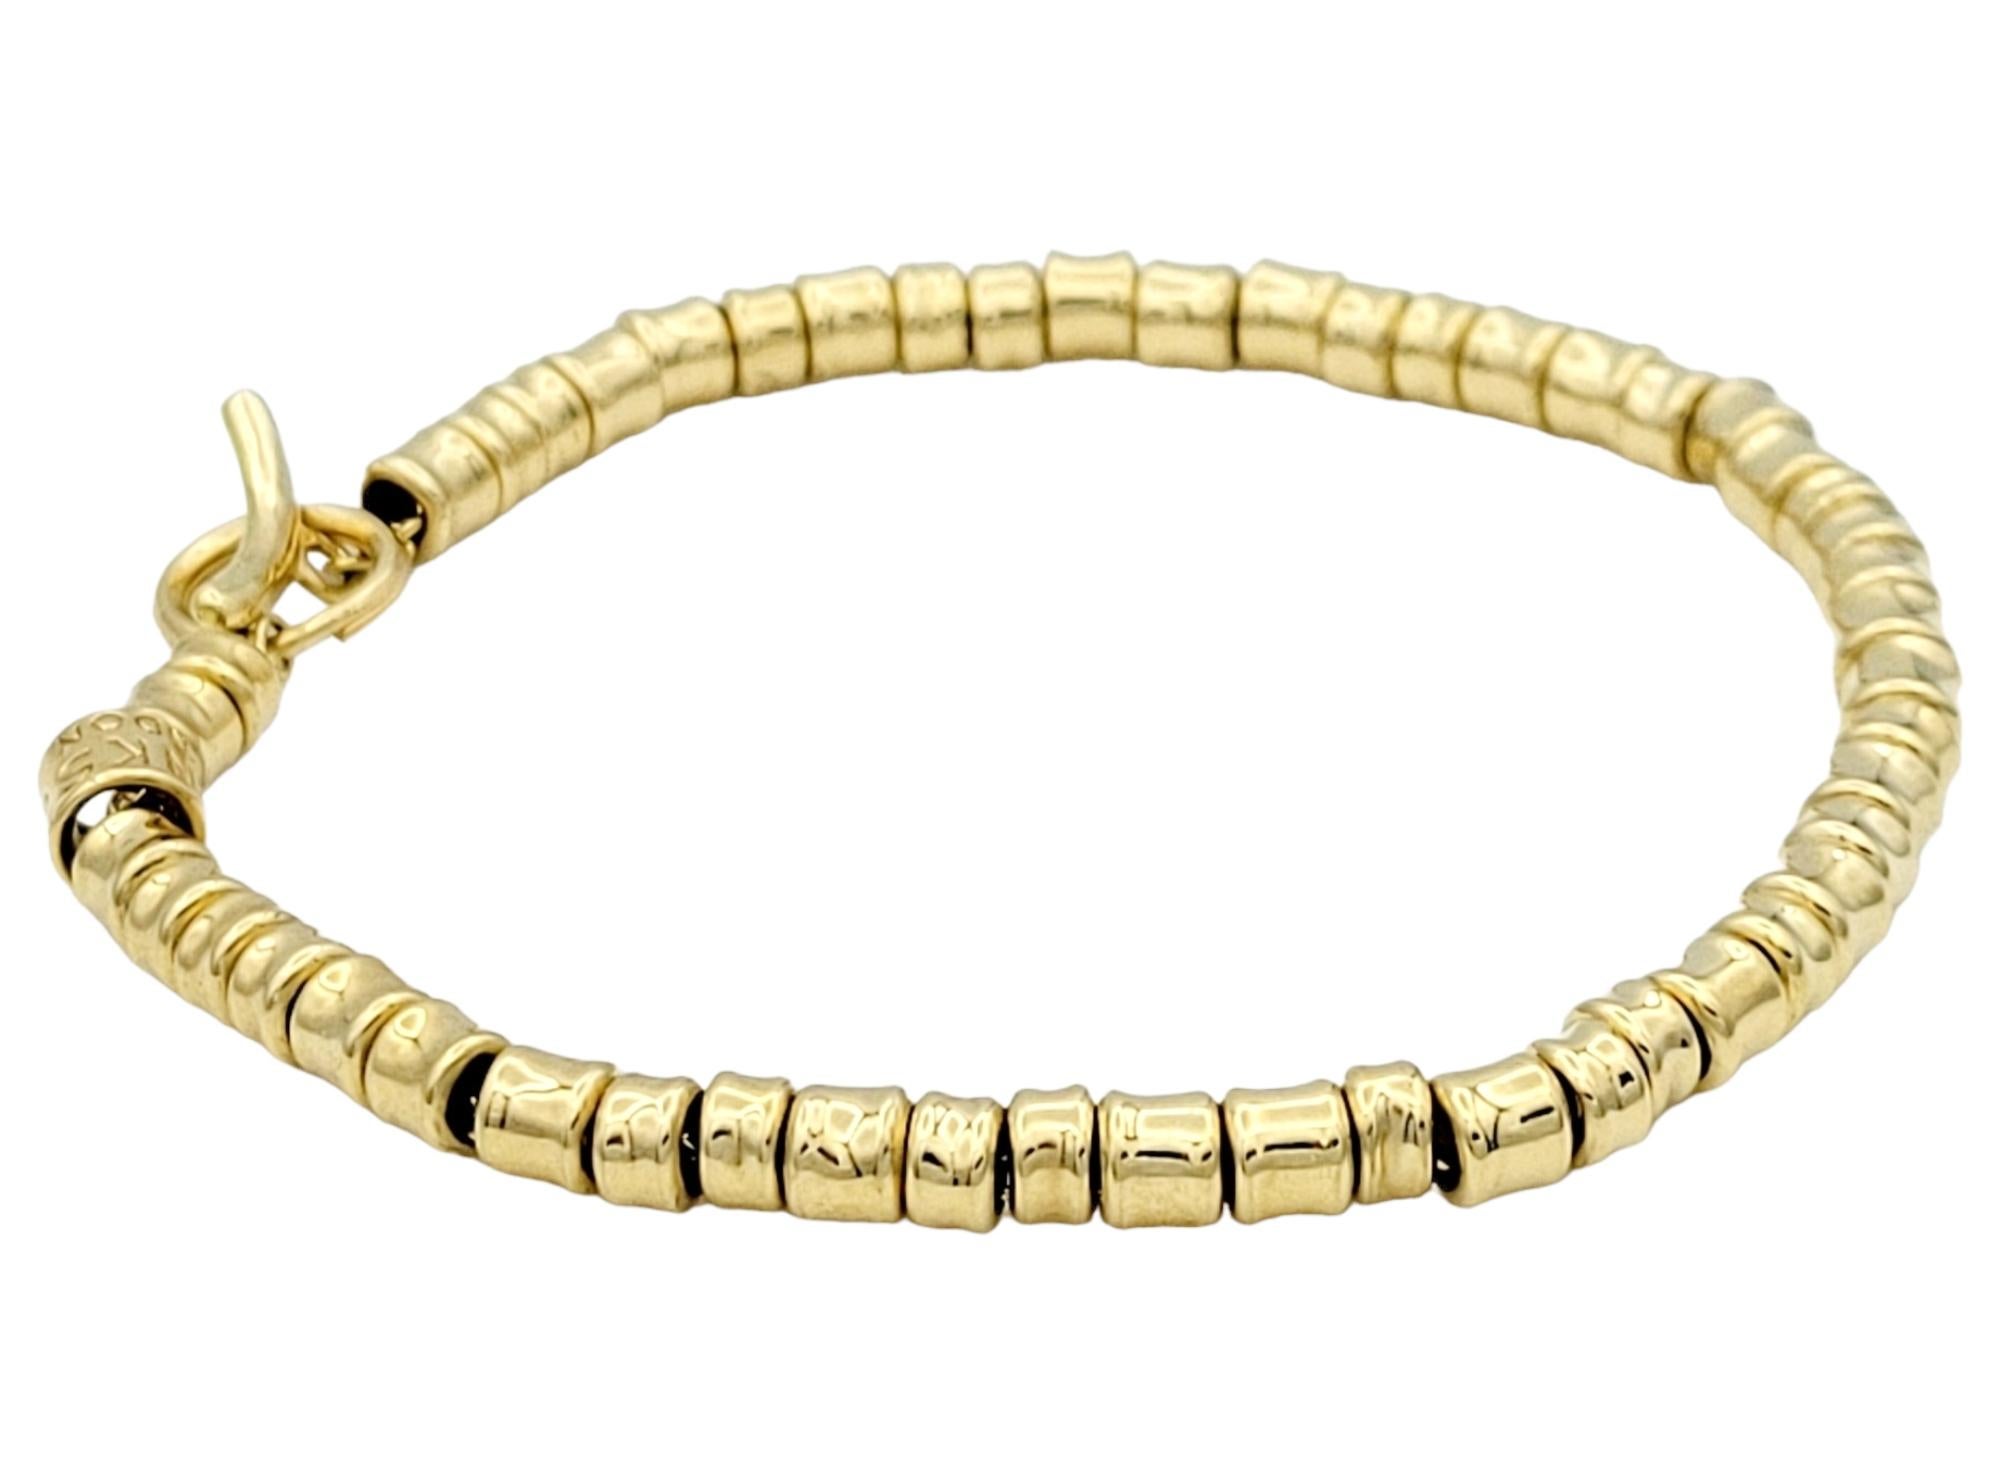 This exquisite Links of London bracelet in luxurious 18-karat yellow gold epitomizes elegance and sophistication. Crafted to perfection, this 7.5